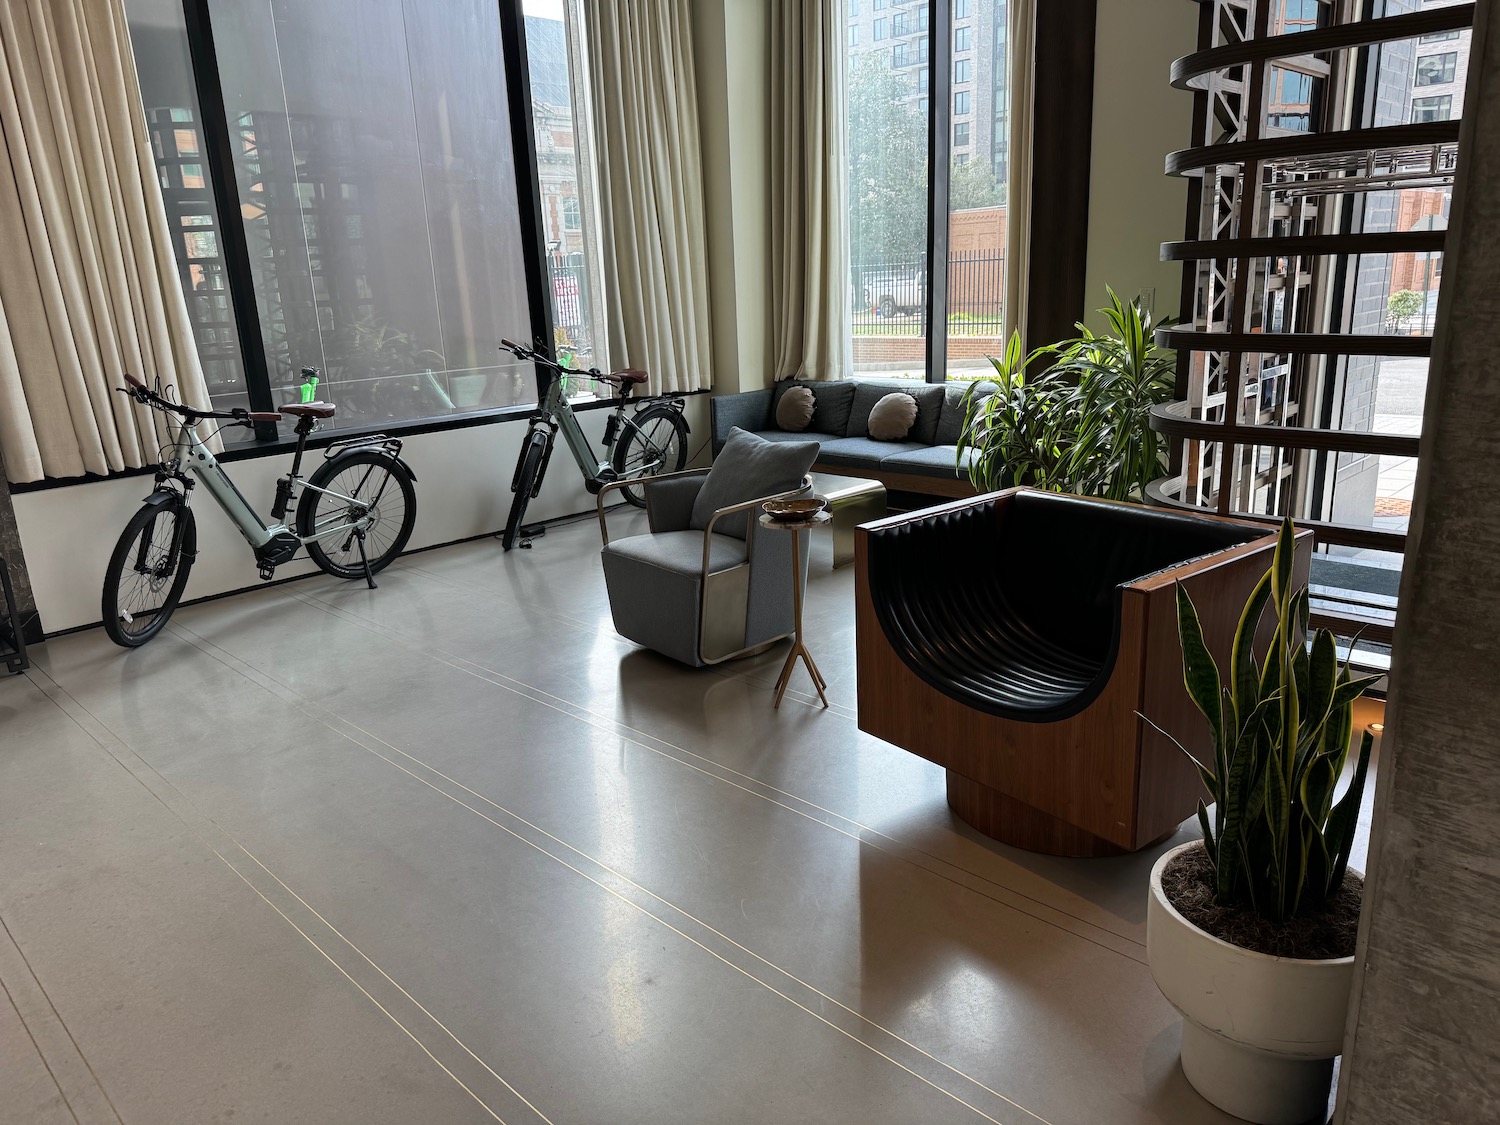 a room with a couch and a bicycle